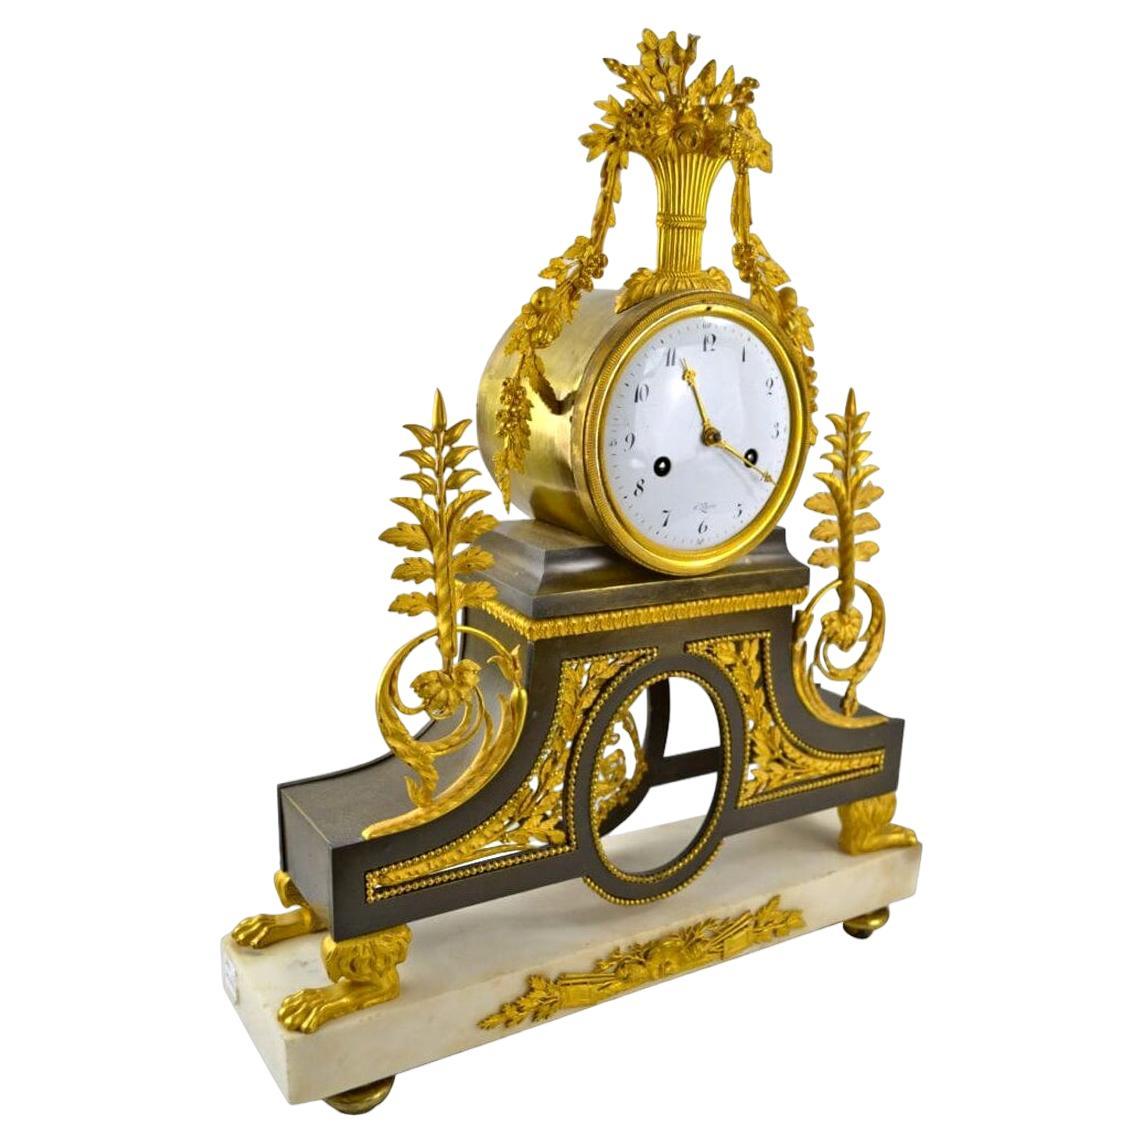 This is a classic Directoire period clock by the famous clock maker Deverberie. The drum-shaped clock is surmounted by an ormolu basket of flowers with festoons of foliage and flowers trailing down its sides. The clock rests on an ormolu plinth with